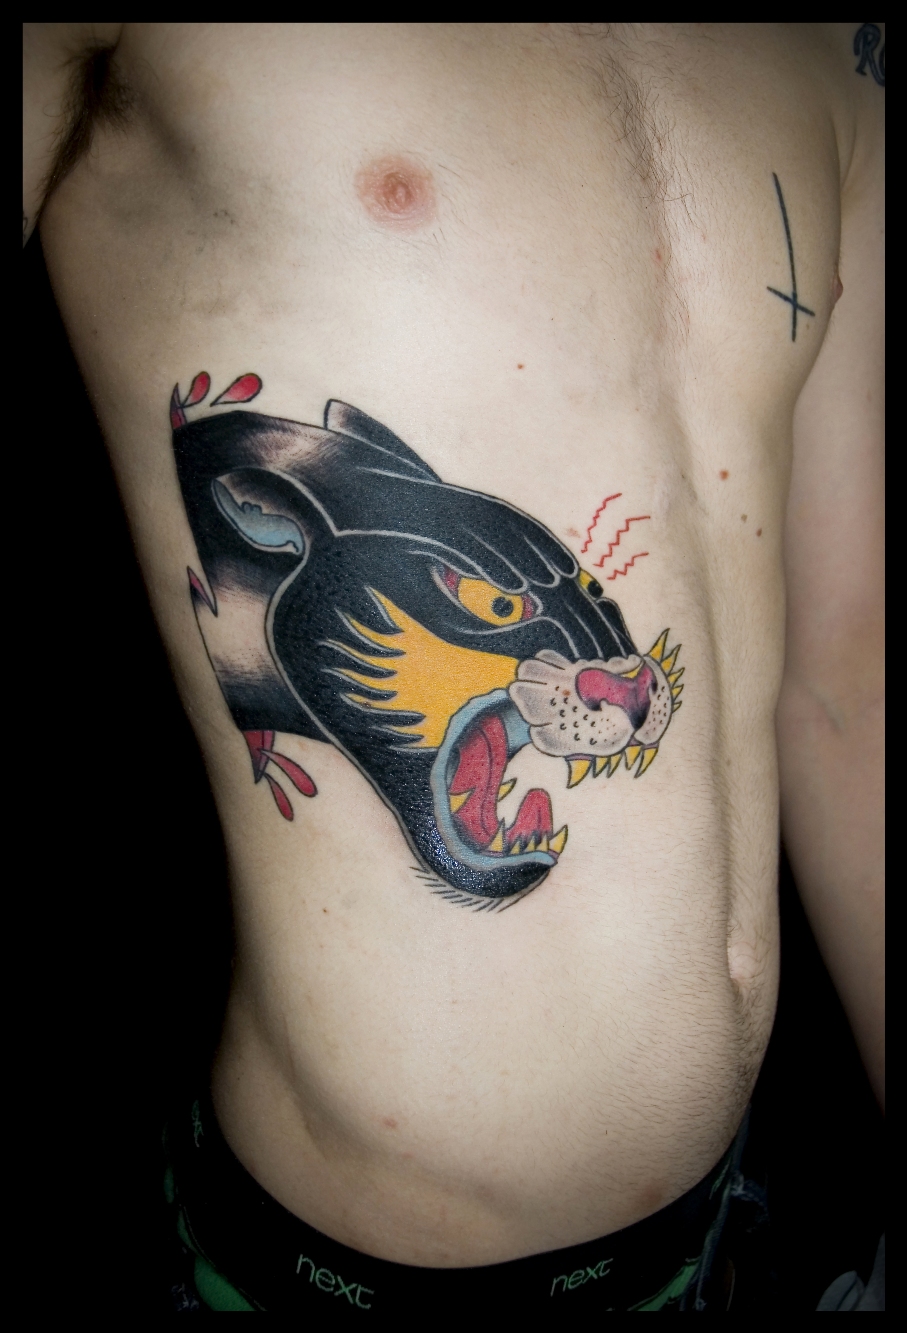 Man With Ripped Skin Panther Head Tattoo on Side Rib